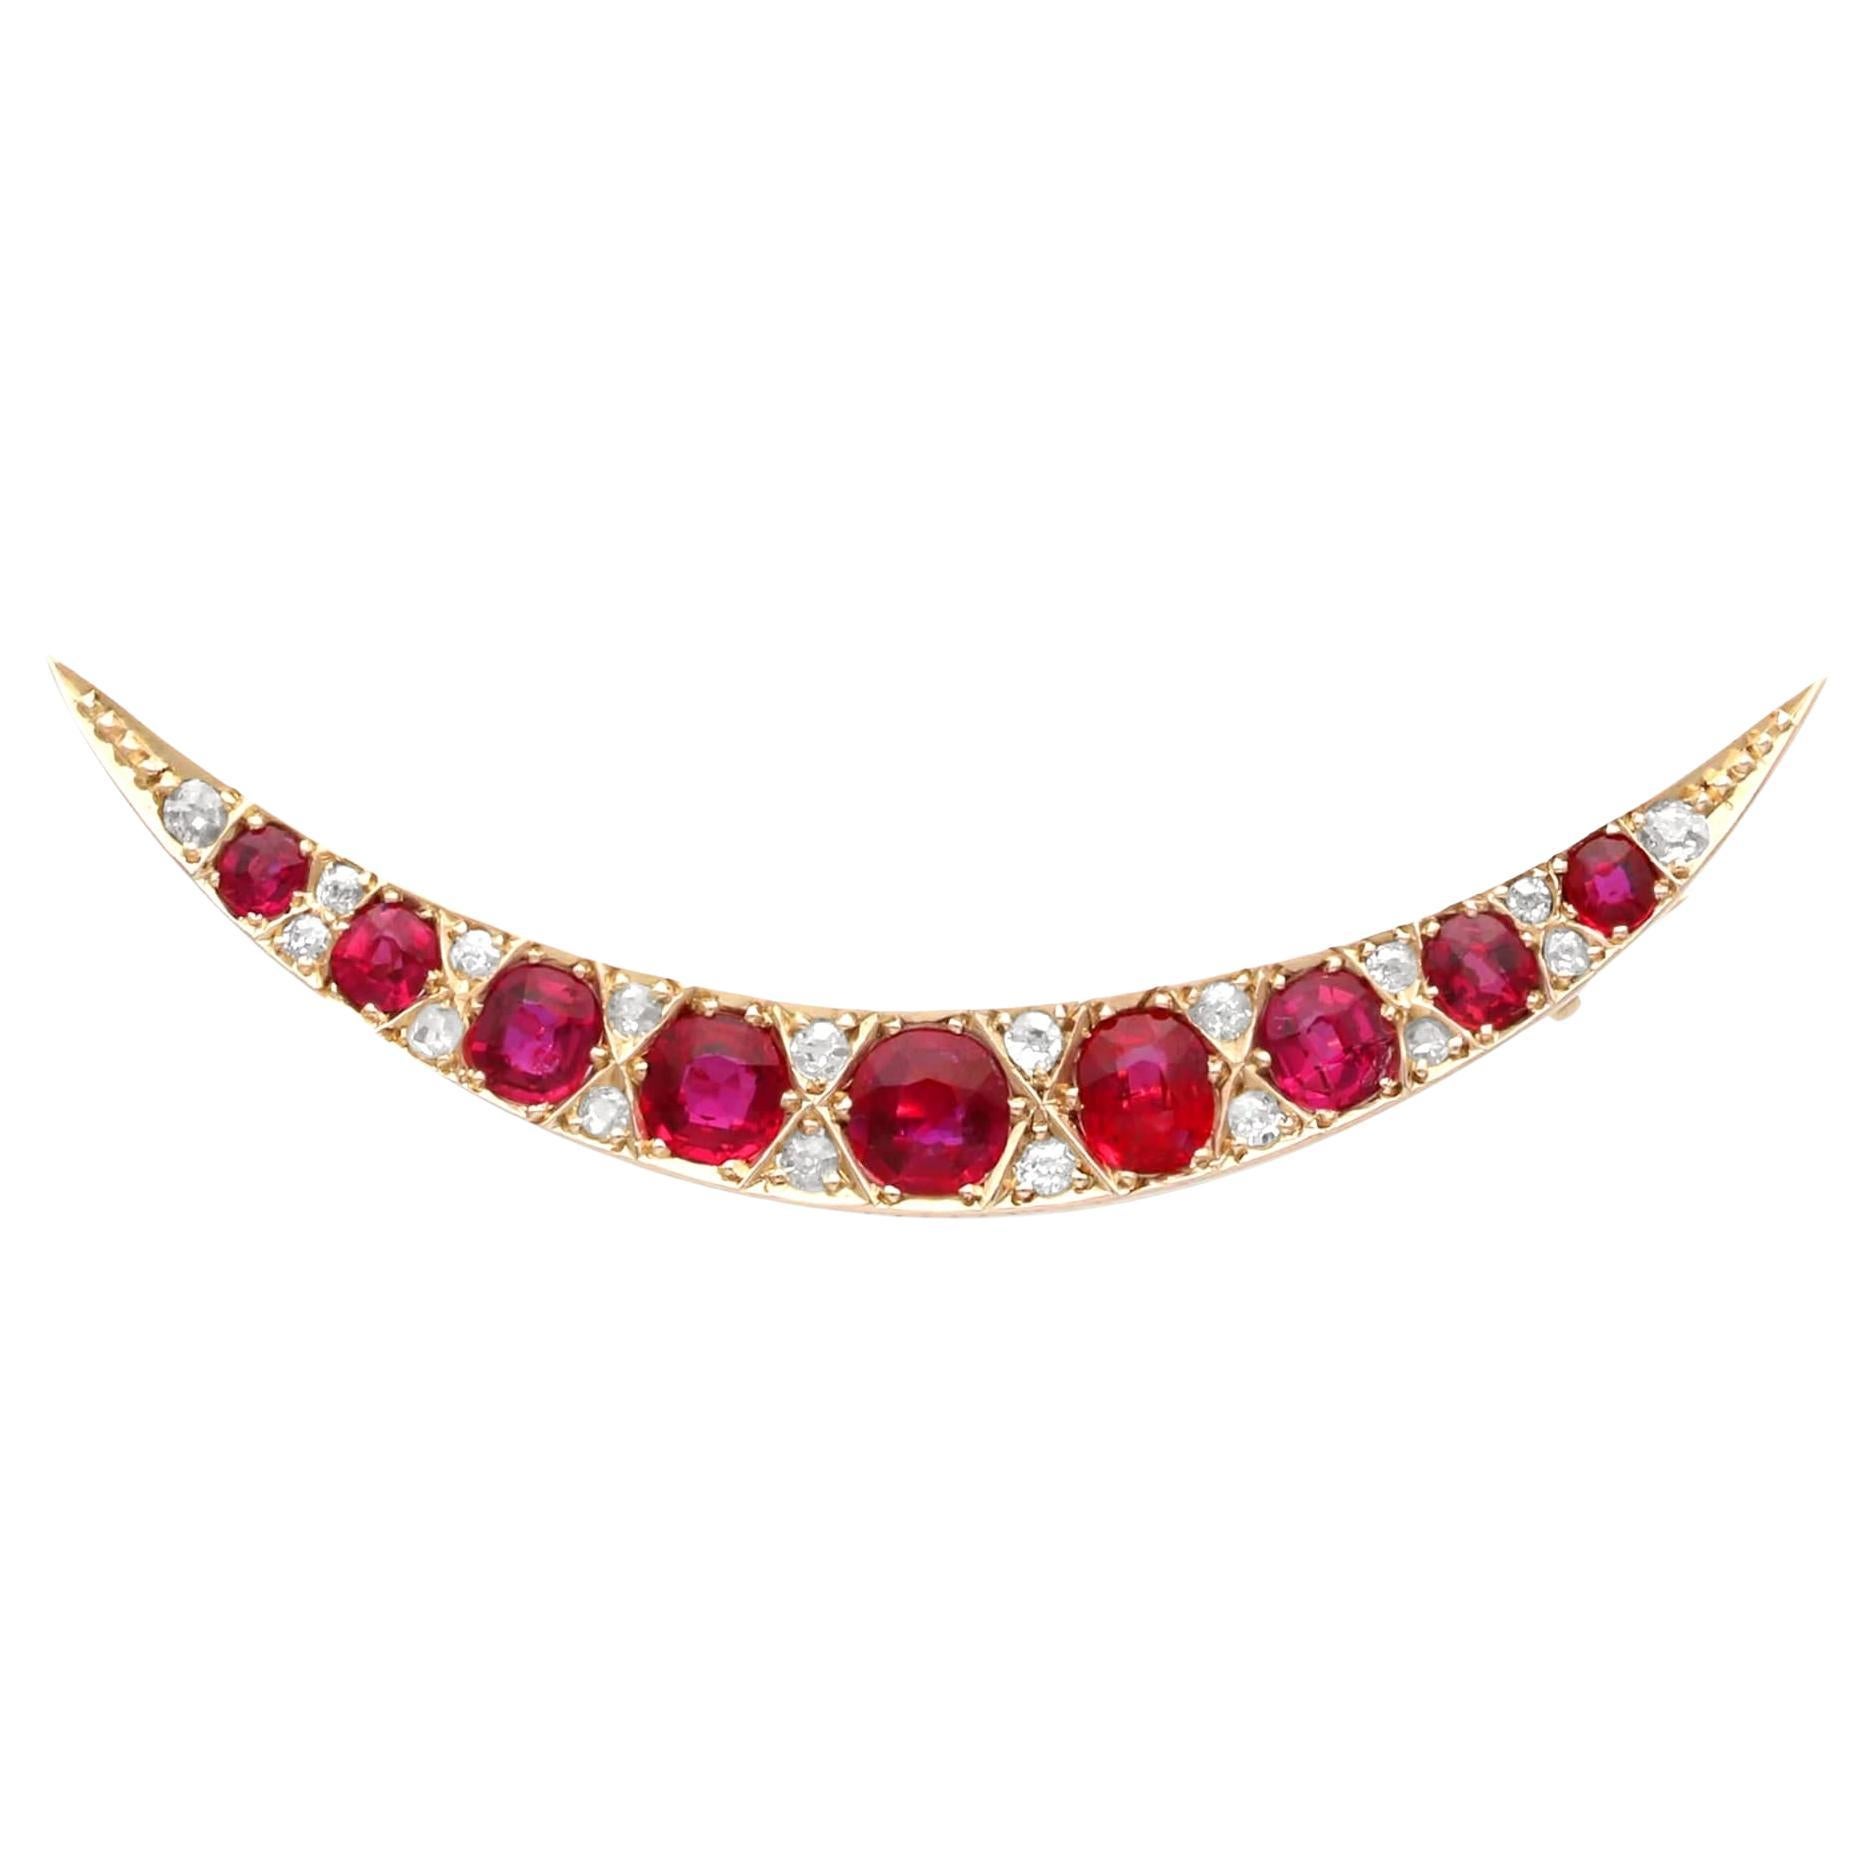 Antique 3.95 Carat Ruby, Diamond Crescent Brooch in 8k Yellow Gold